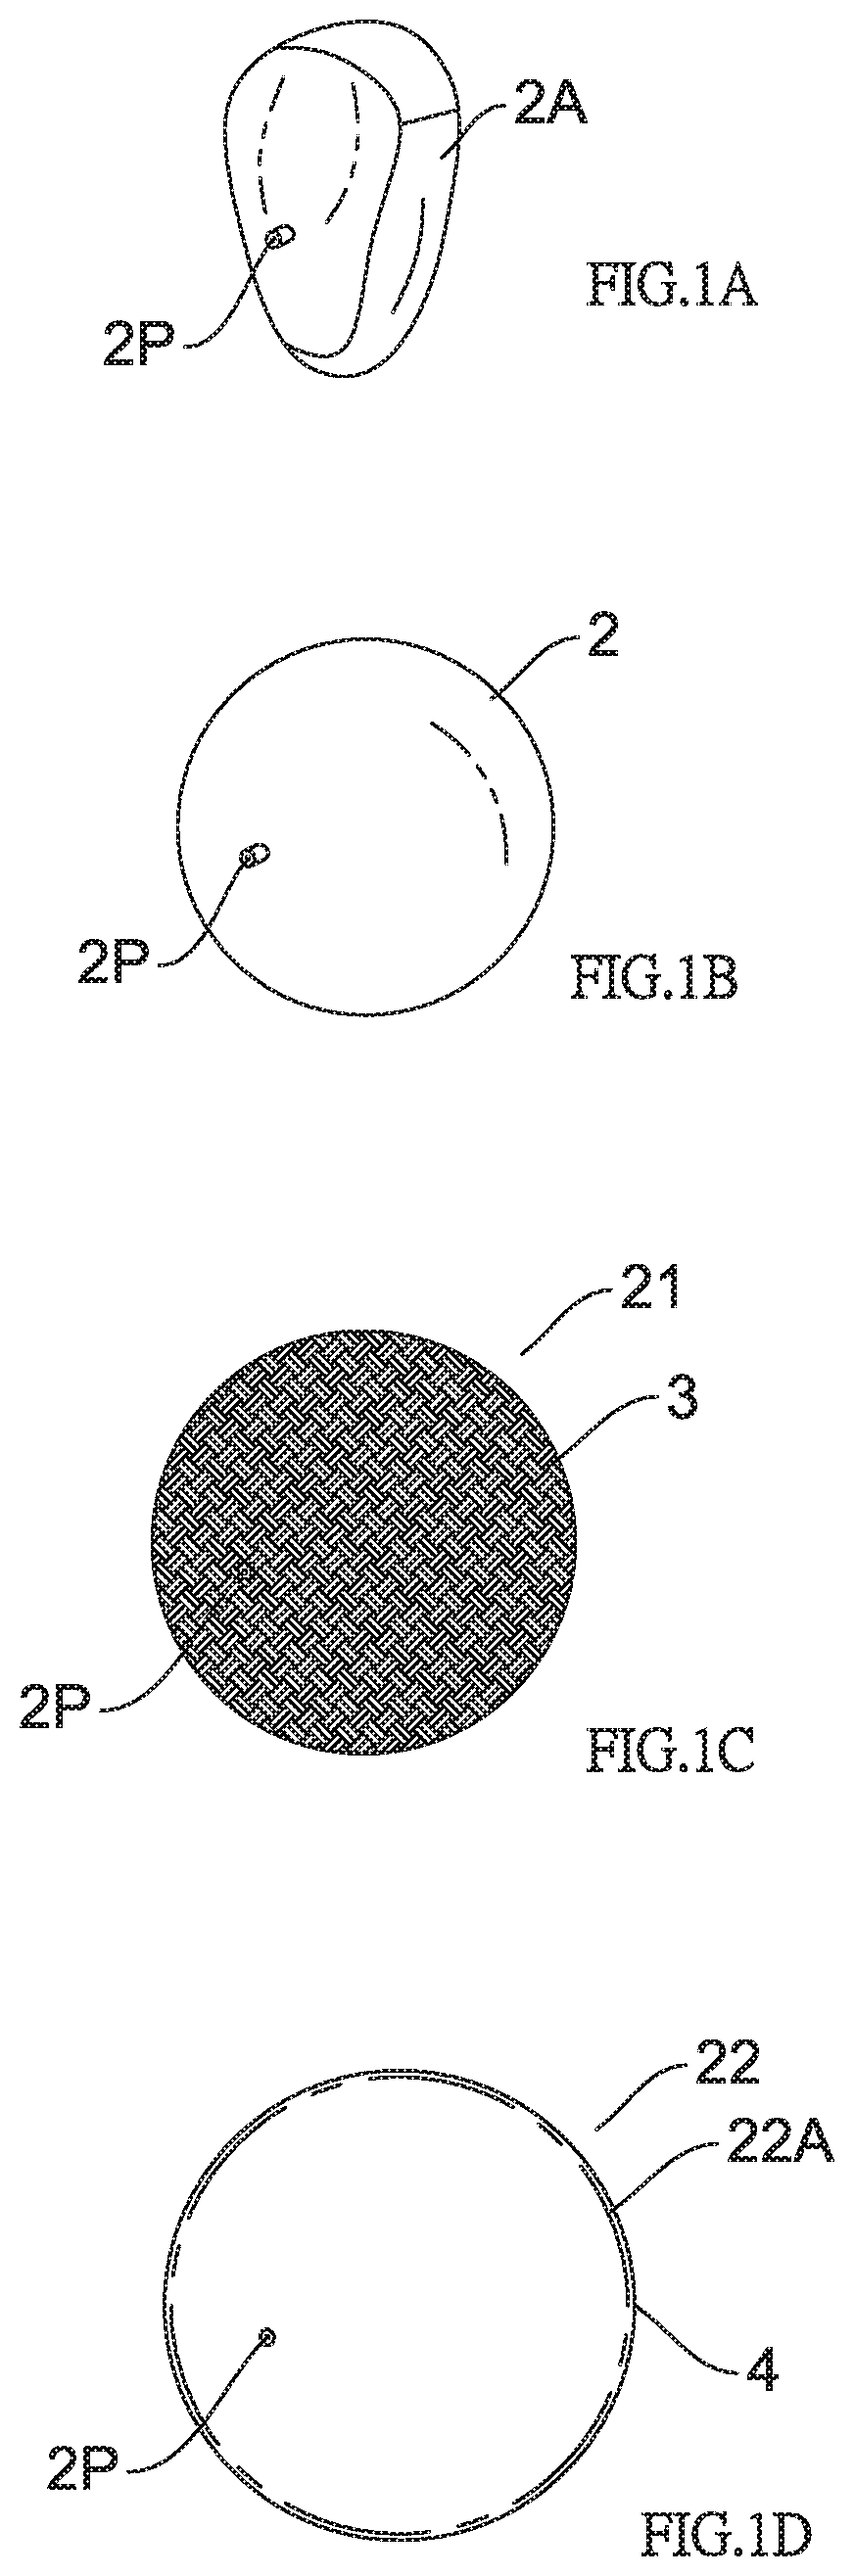 Method of Manufacturing Seamless Inflatable Ball